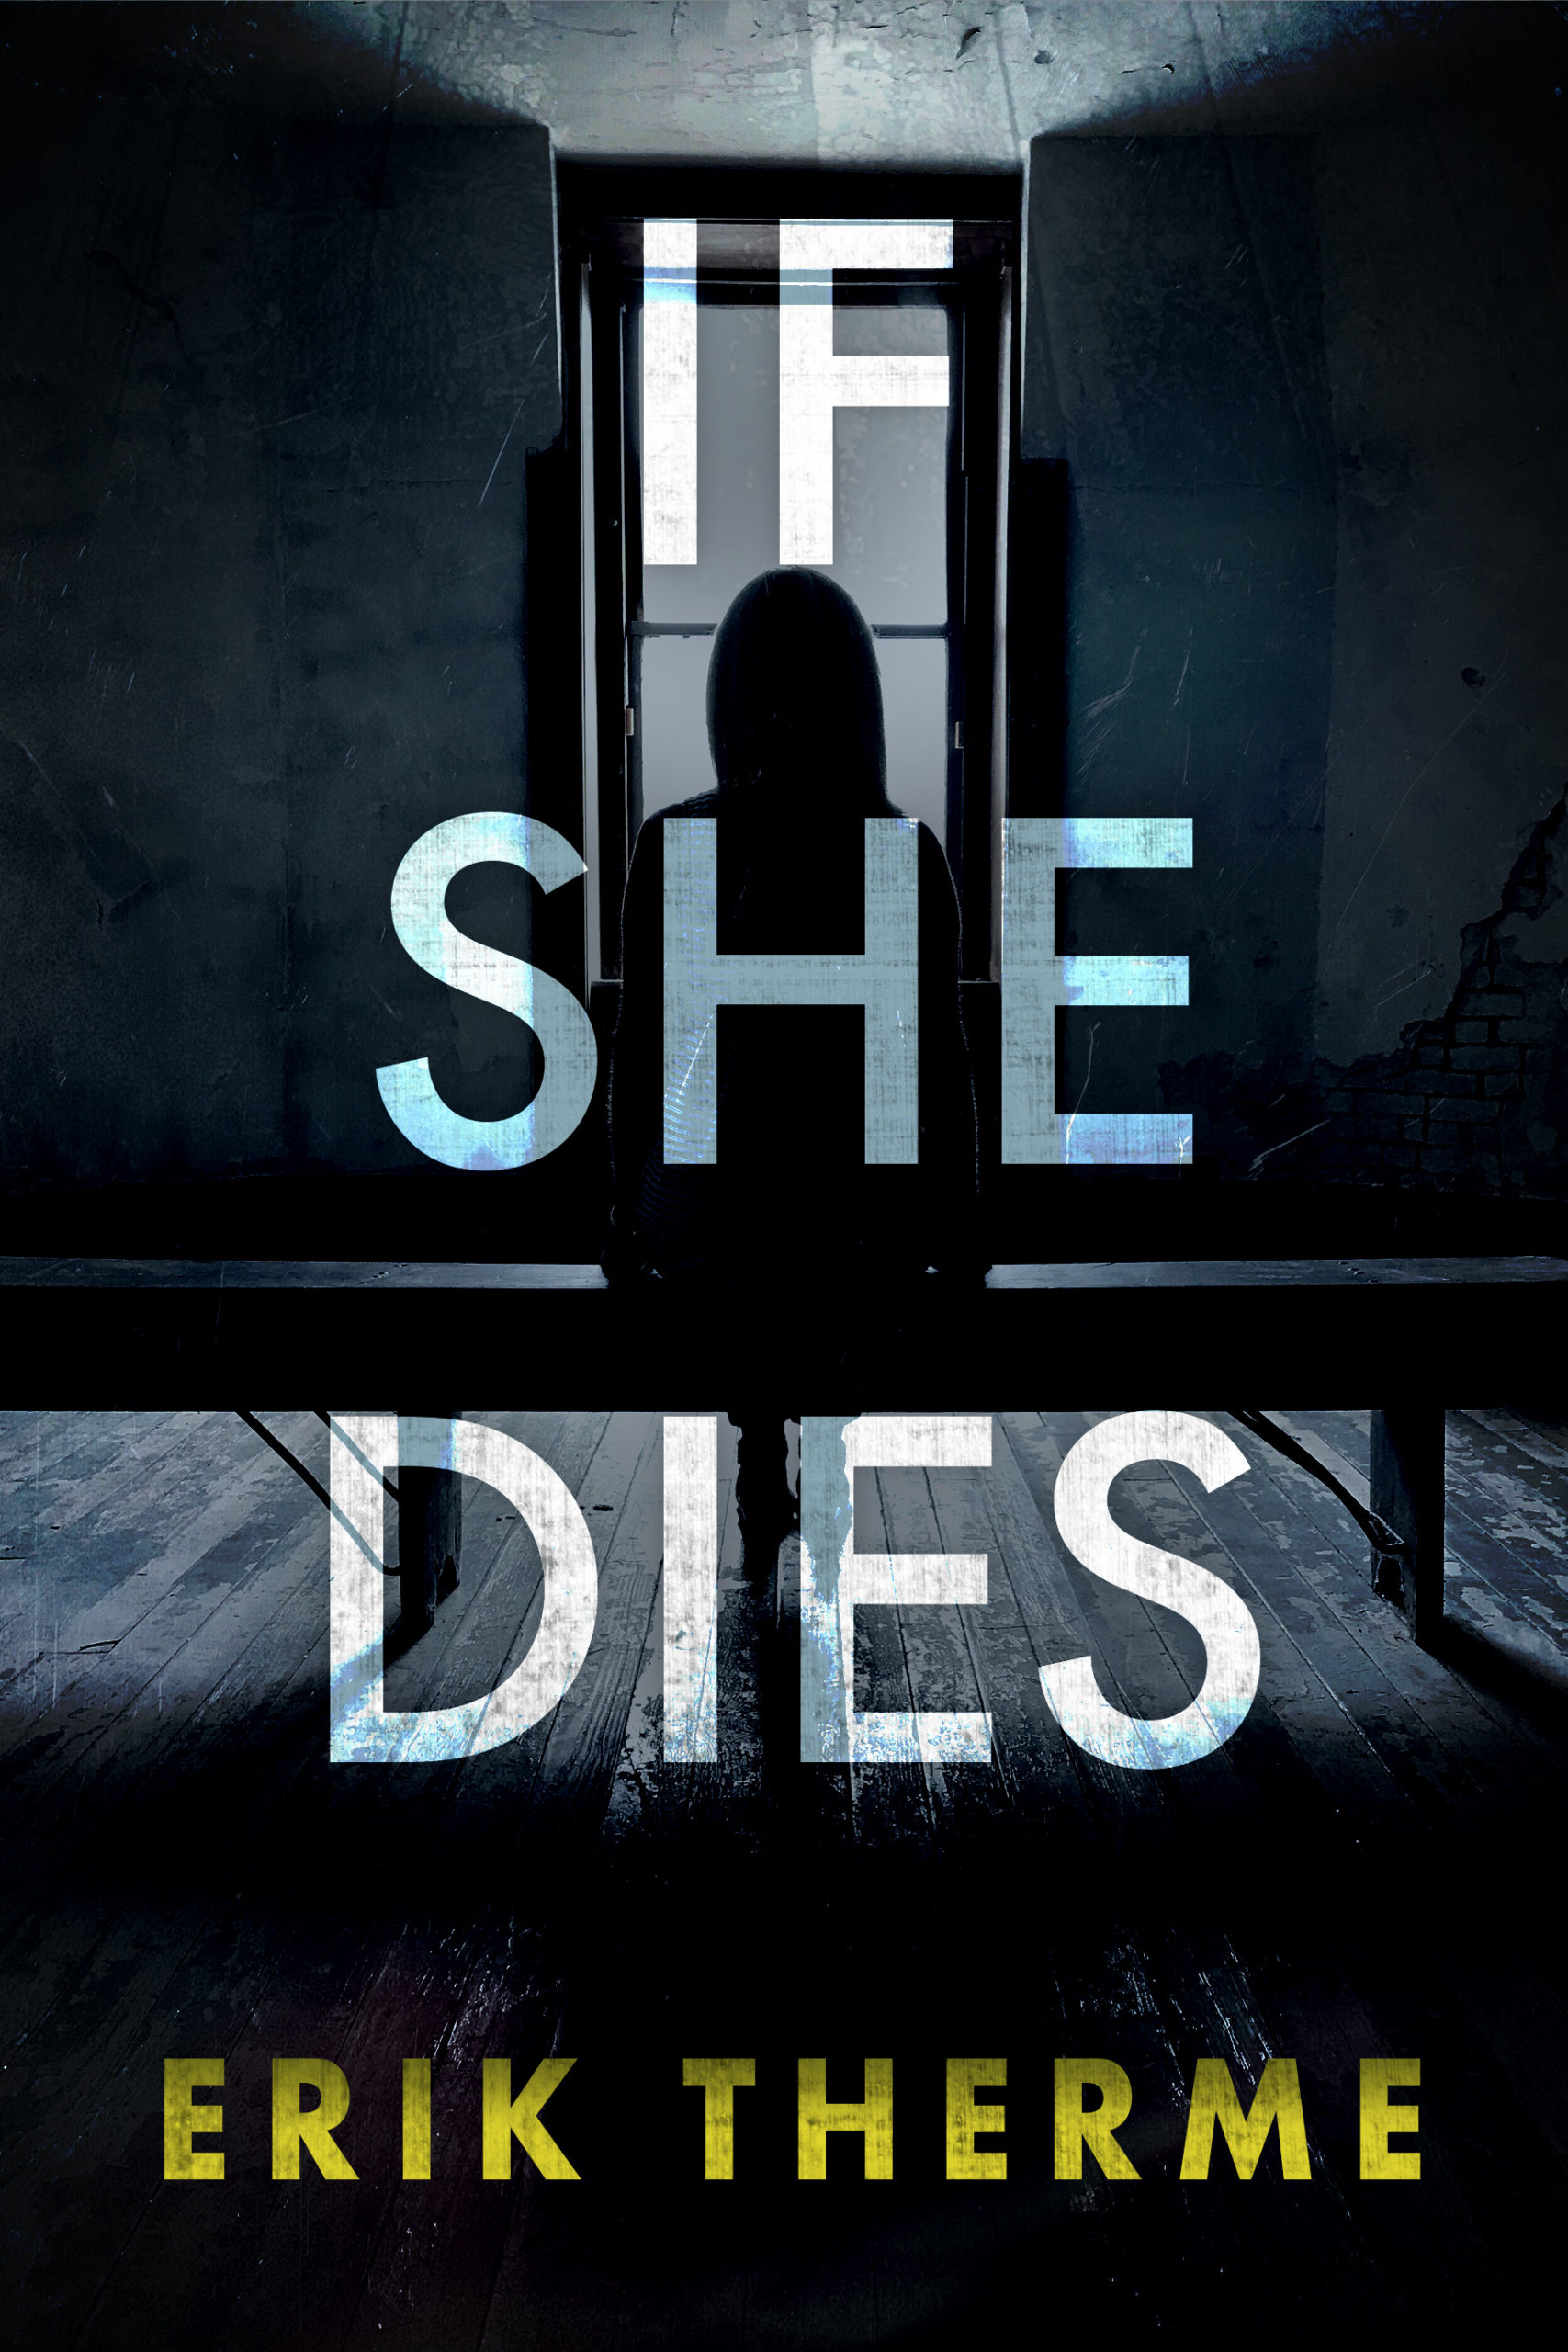 If She Dies by Erik Therme